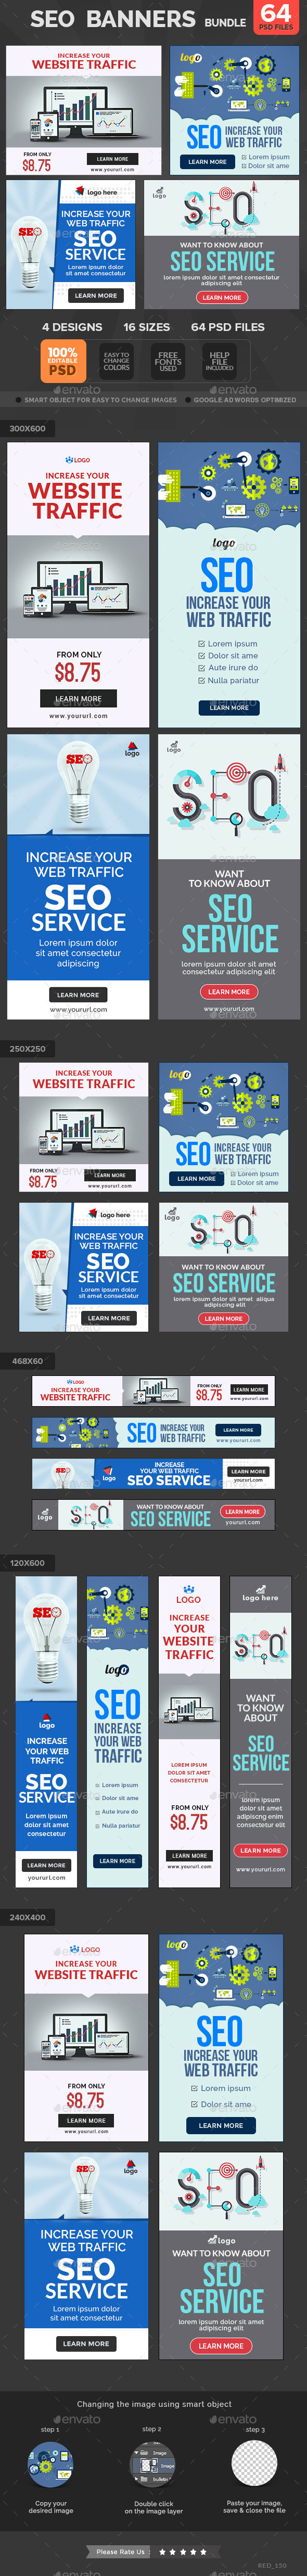 Red 150 seo 20banners 20bundle preview